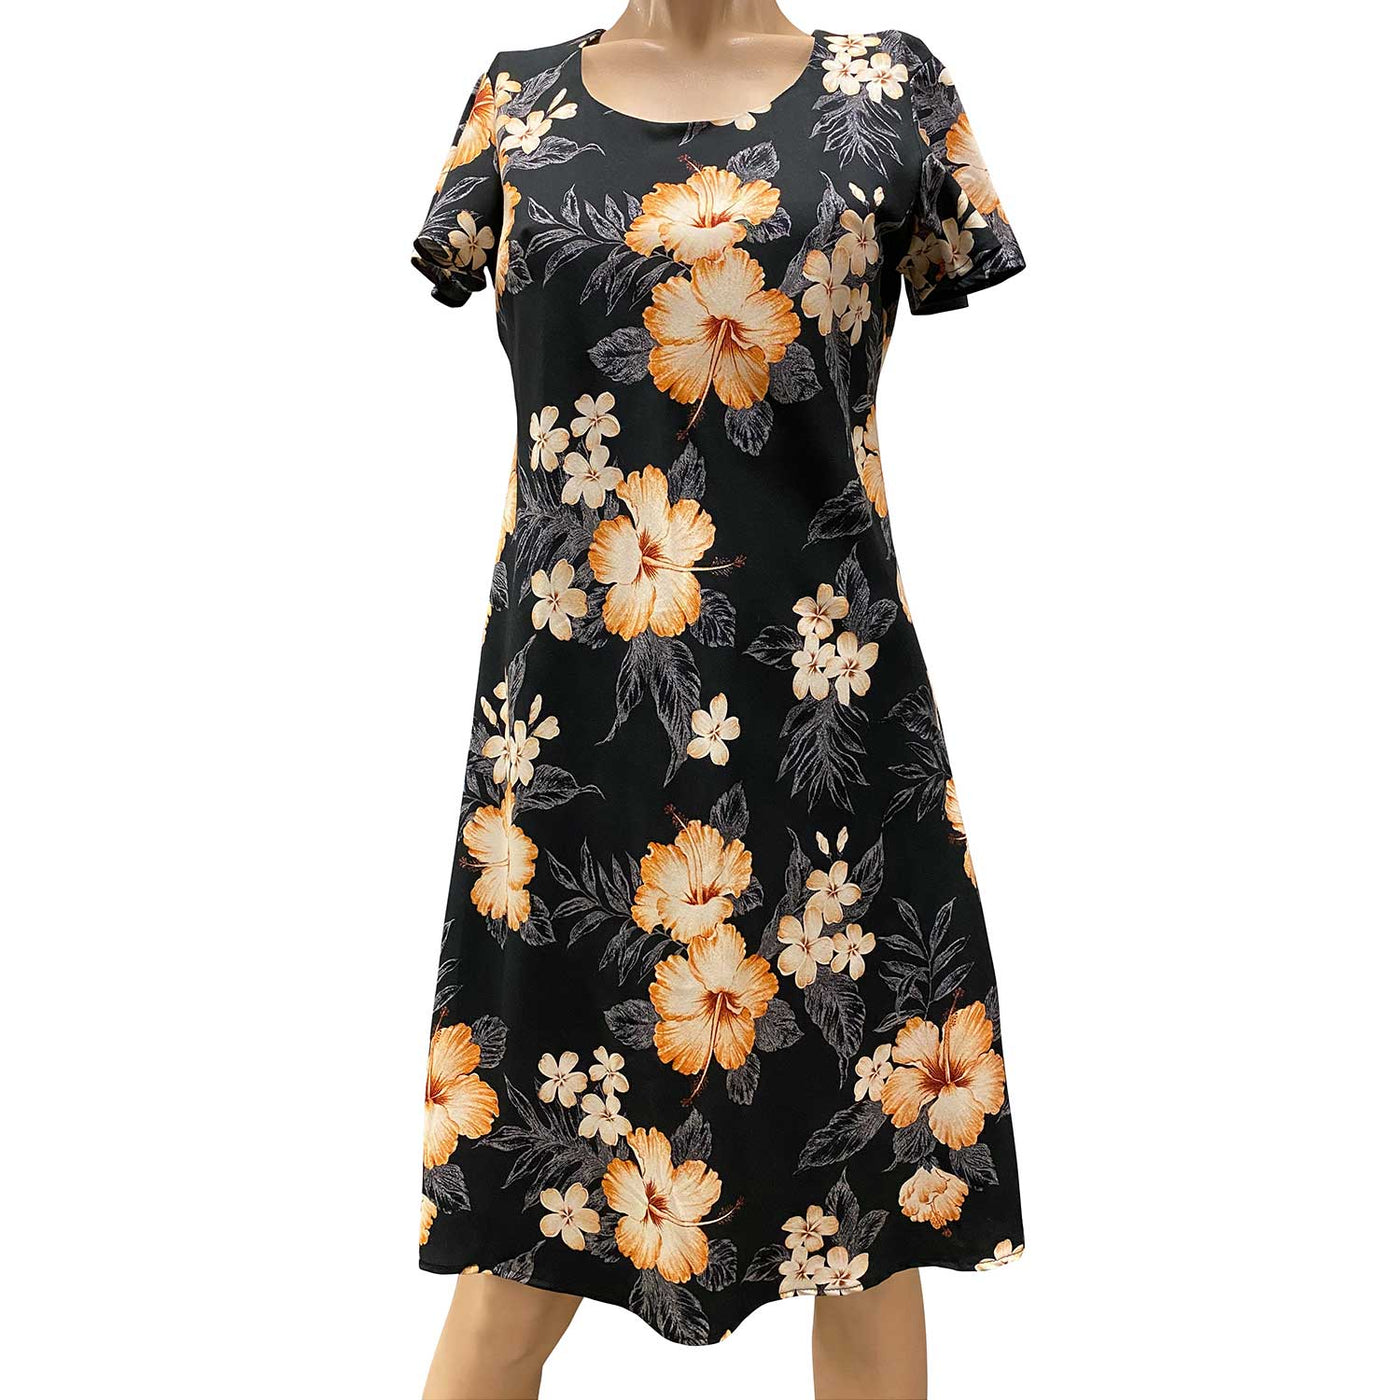 Hibiscus Resort Black A-Line Dress with Cap Sleeves